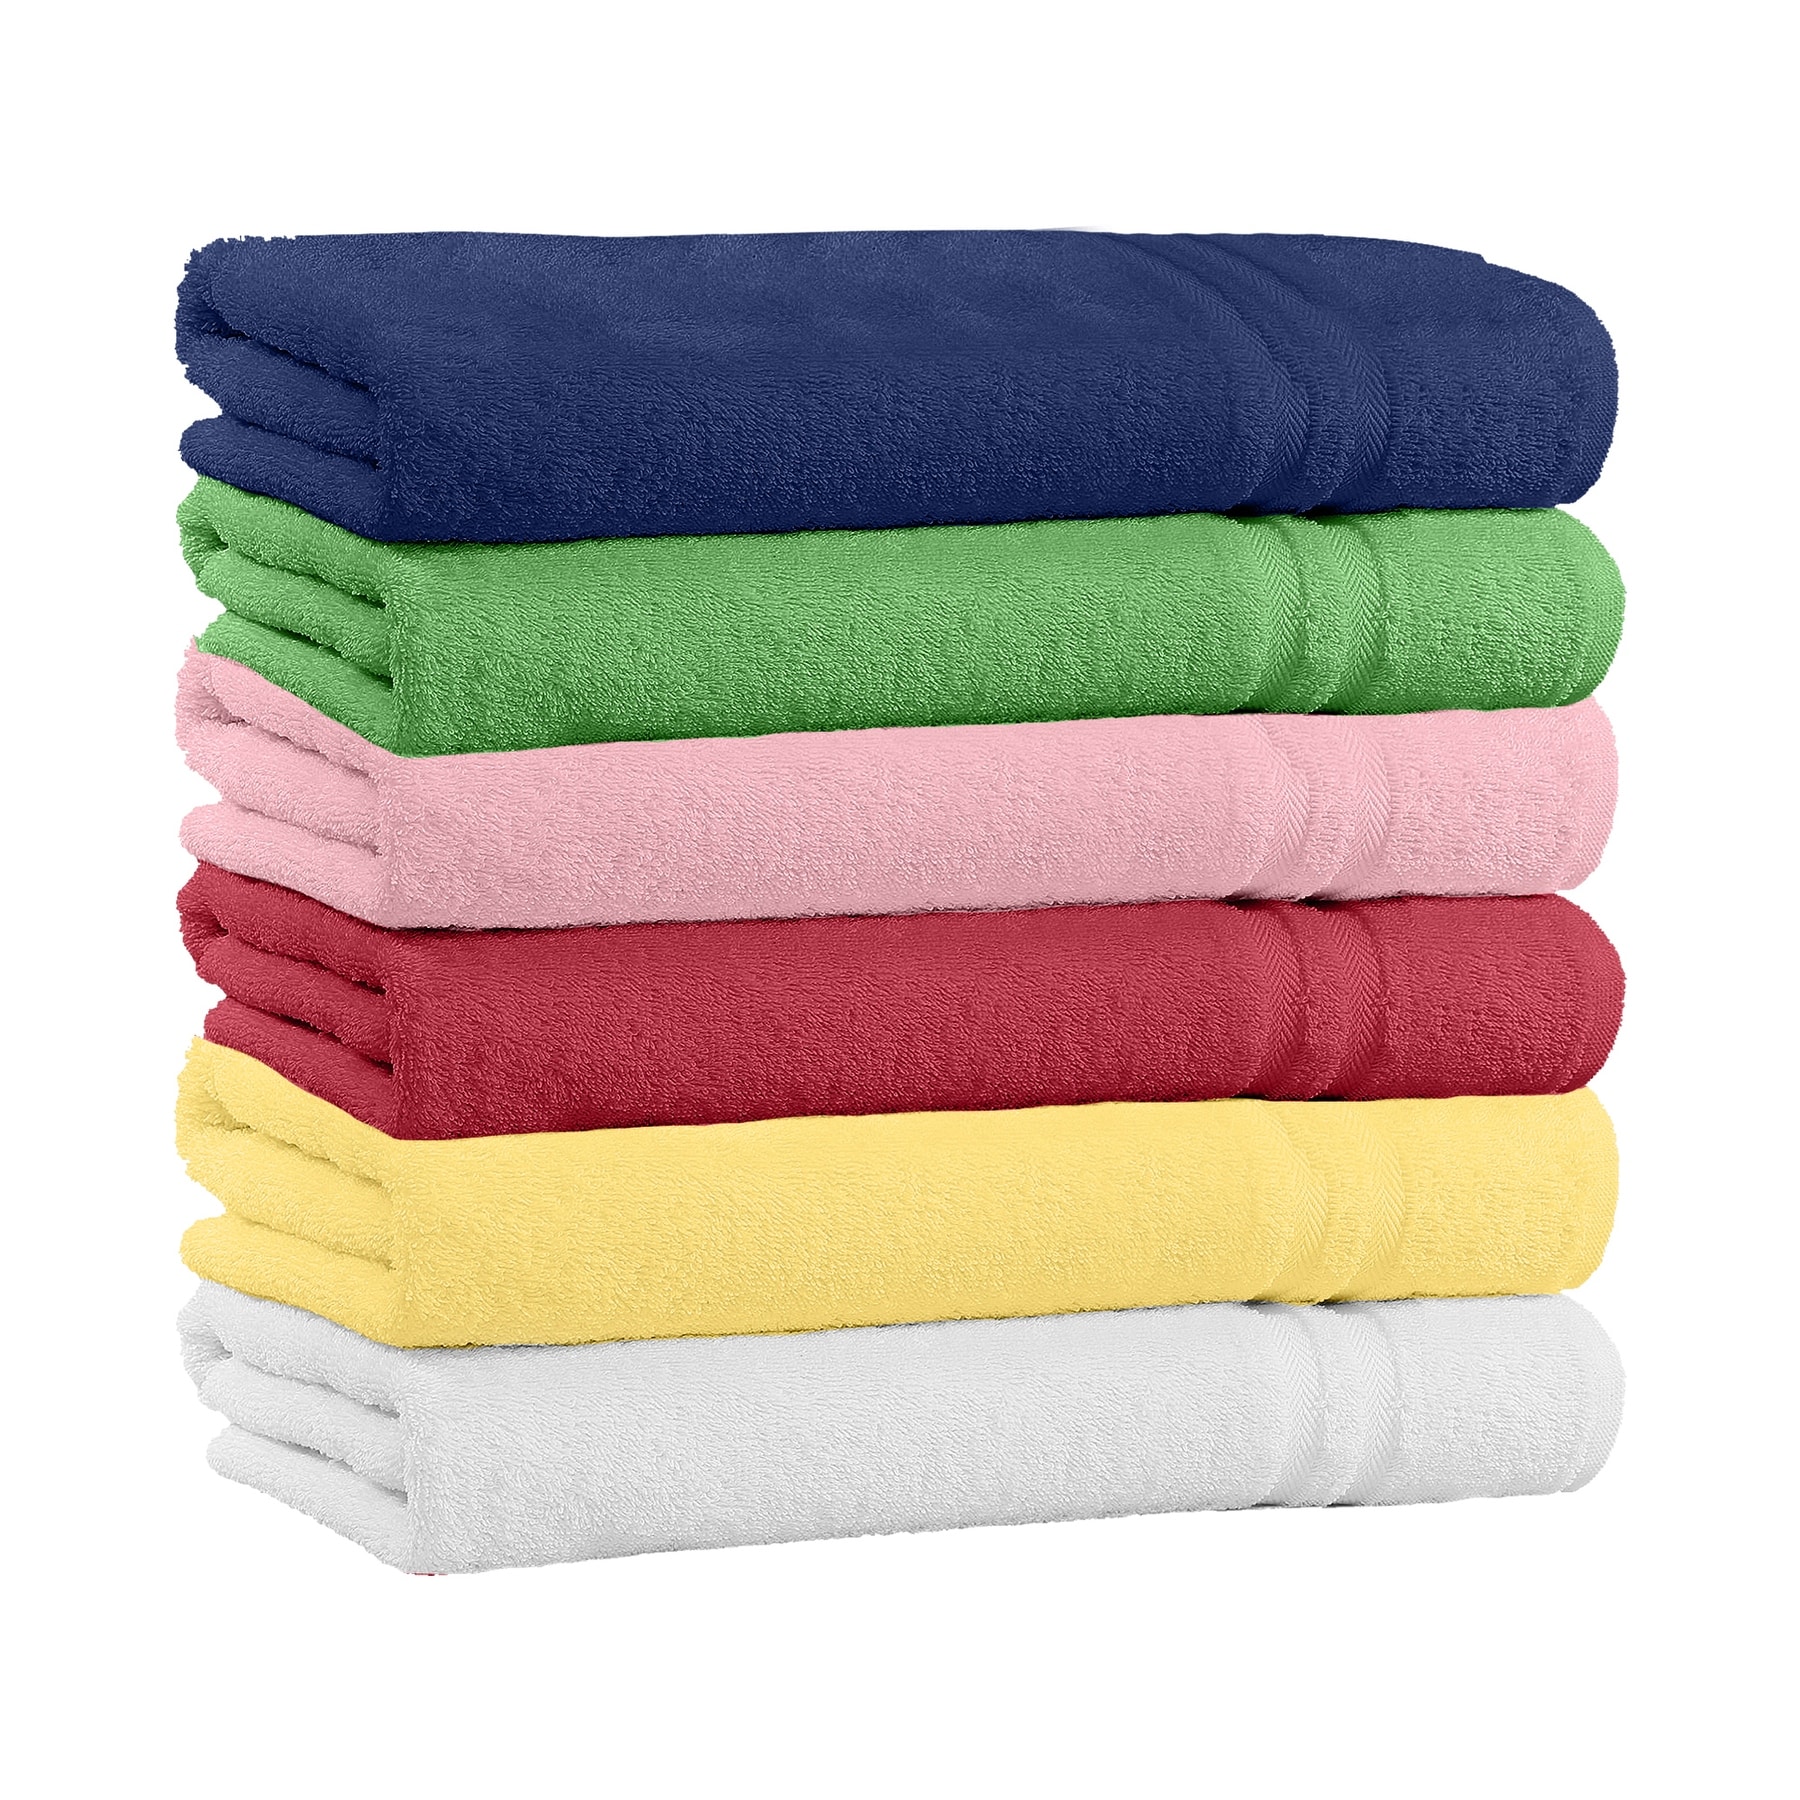 https://ak1.ostkcdn.com/images/products/is/images/direct/0cb4352e16a1d968cd9e54cd4b69388ff7c2ecb1/5-Pack-100%25-Cotton-Extra-Plush-%26-Absorbent-Bath-Towels.jpg